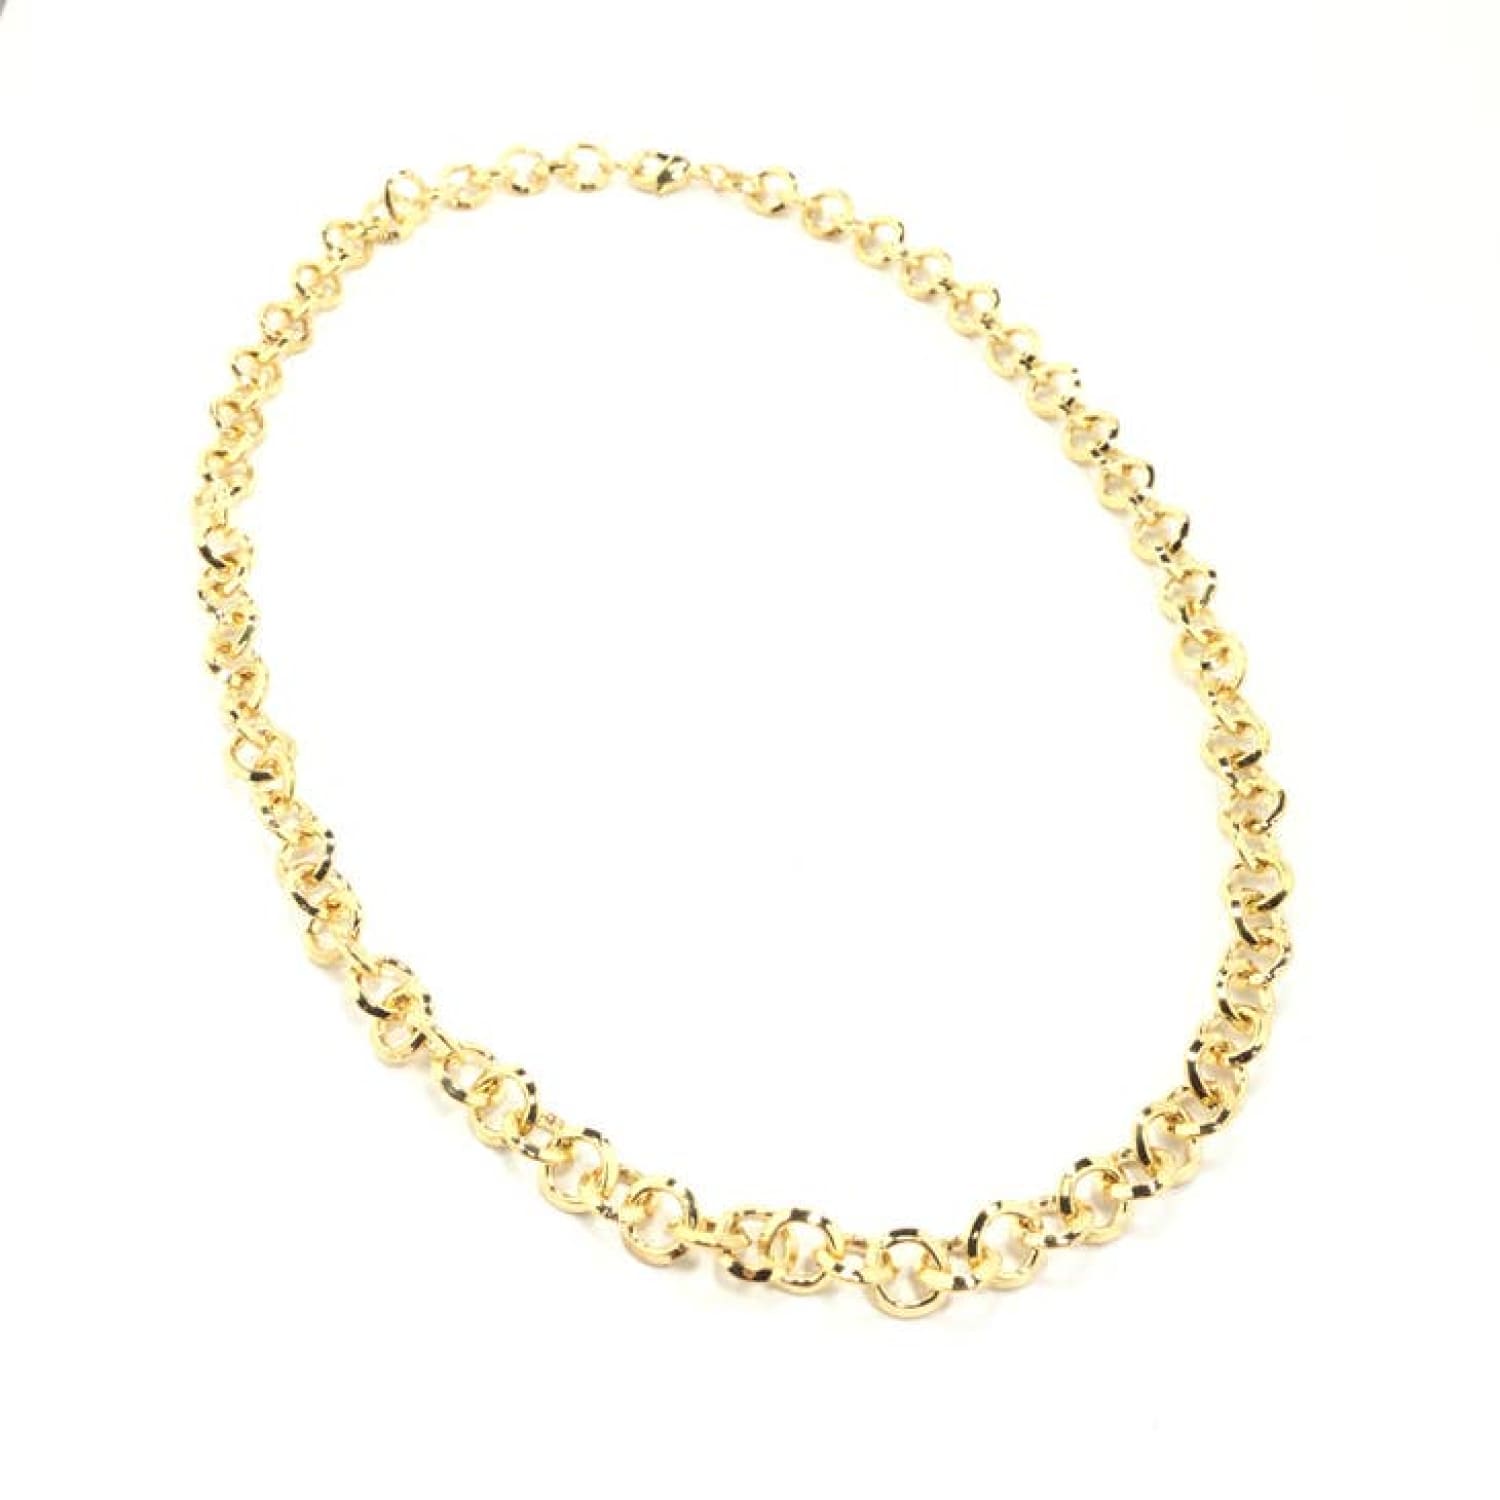 Cable Chain Necklace Gold Chain Necklace - Plated - Sale